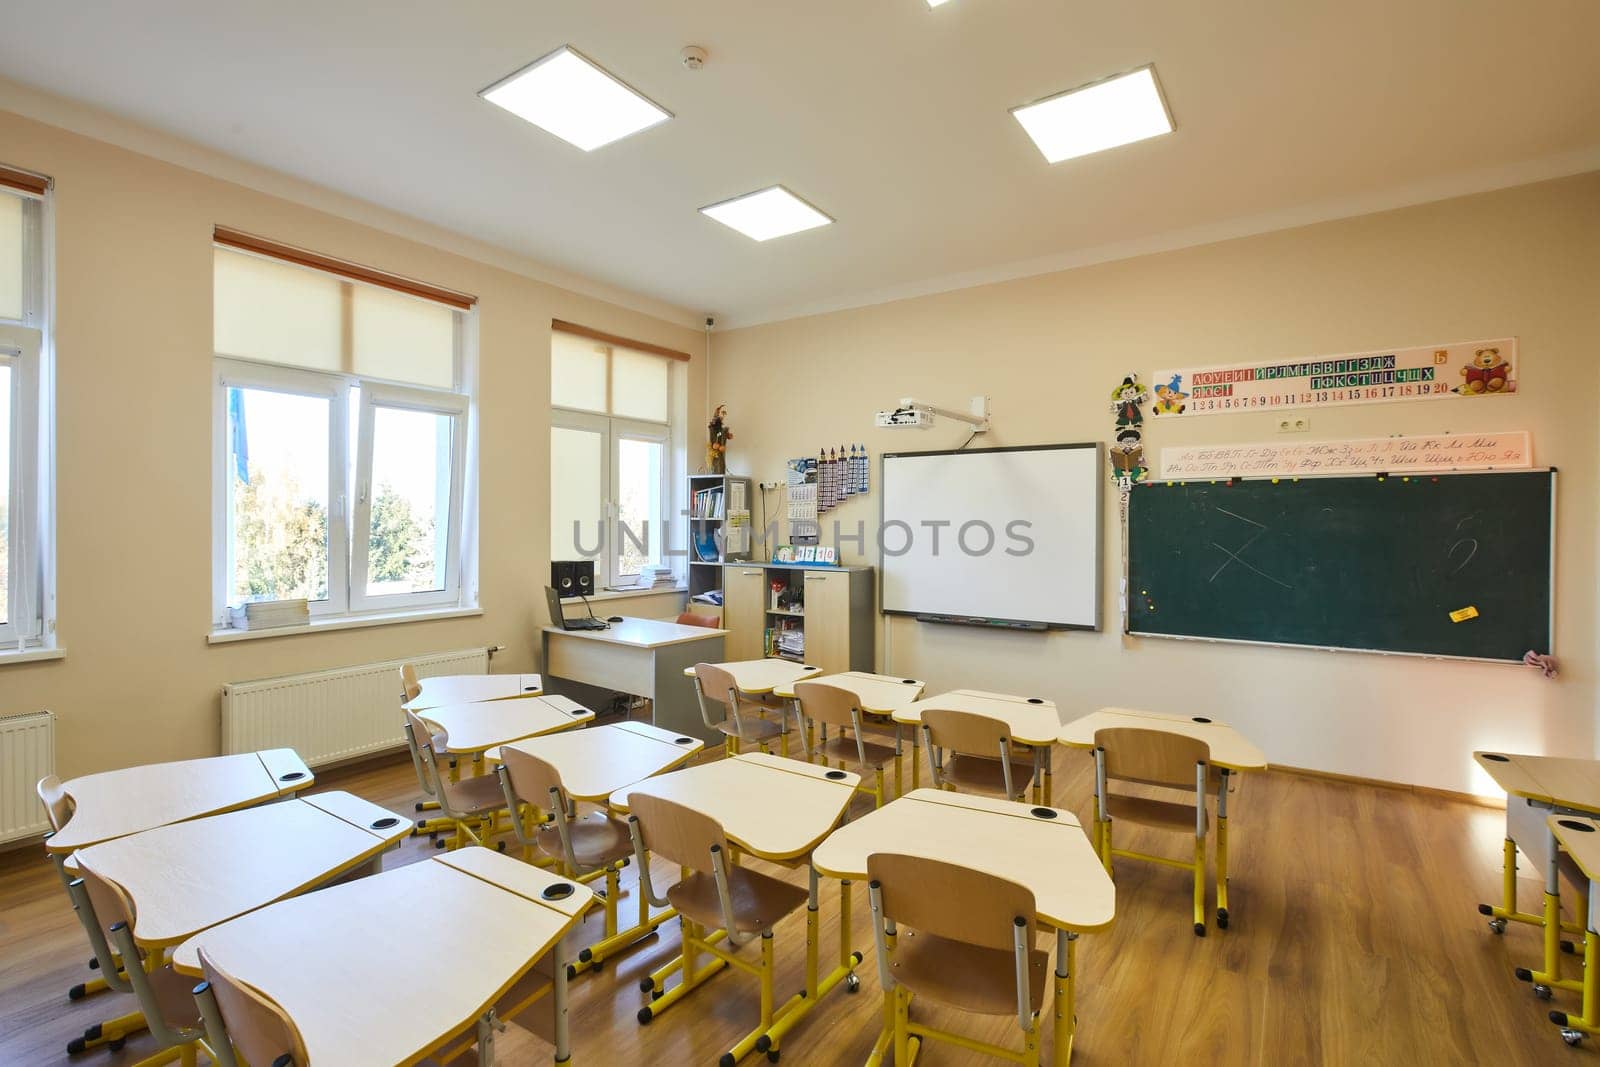 class in school desks and chairs. High quality photo